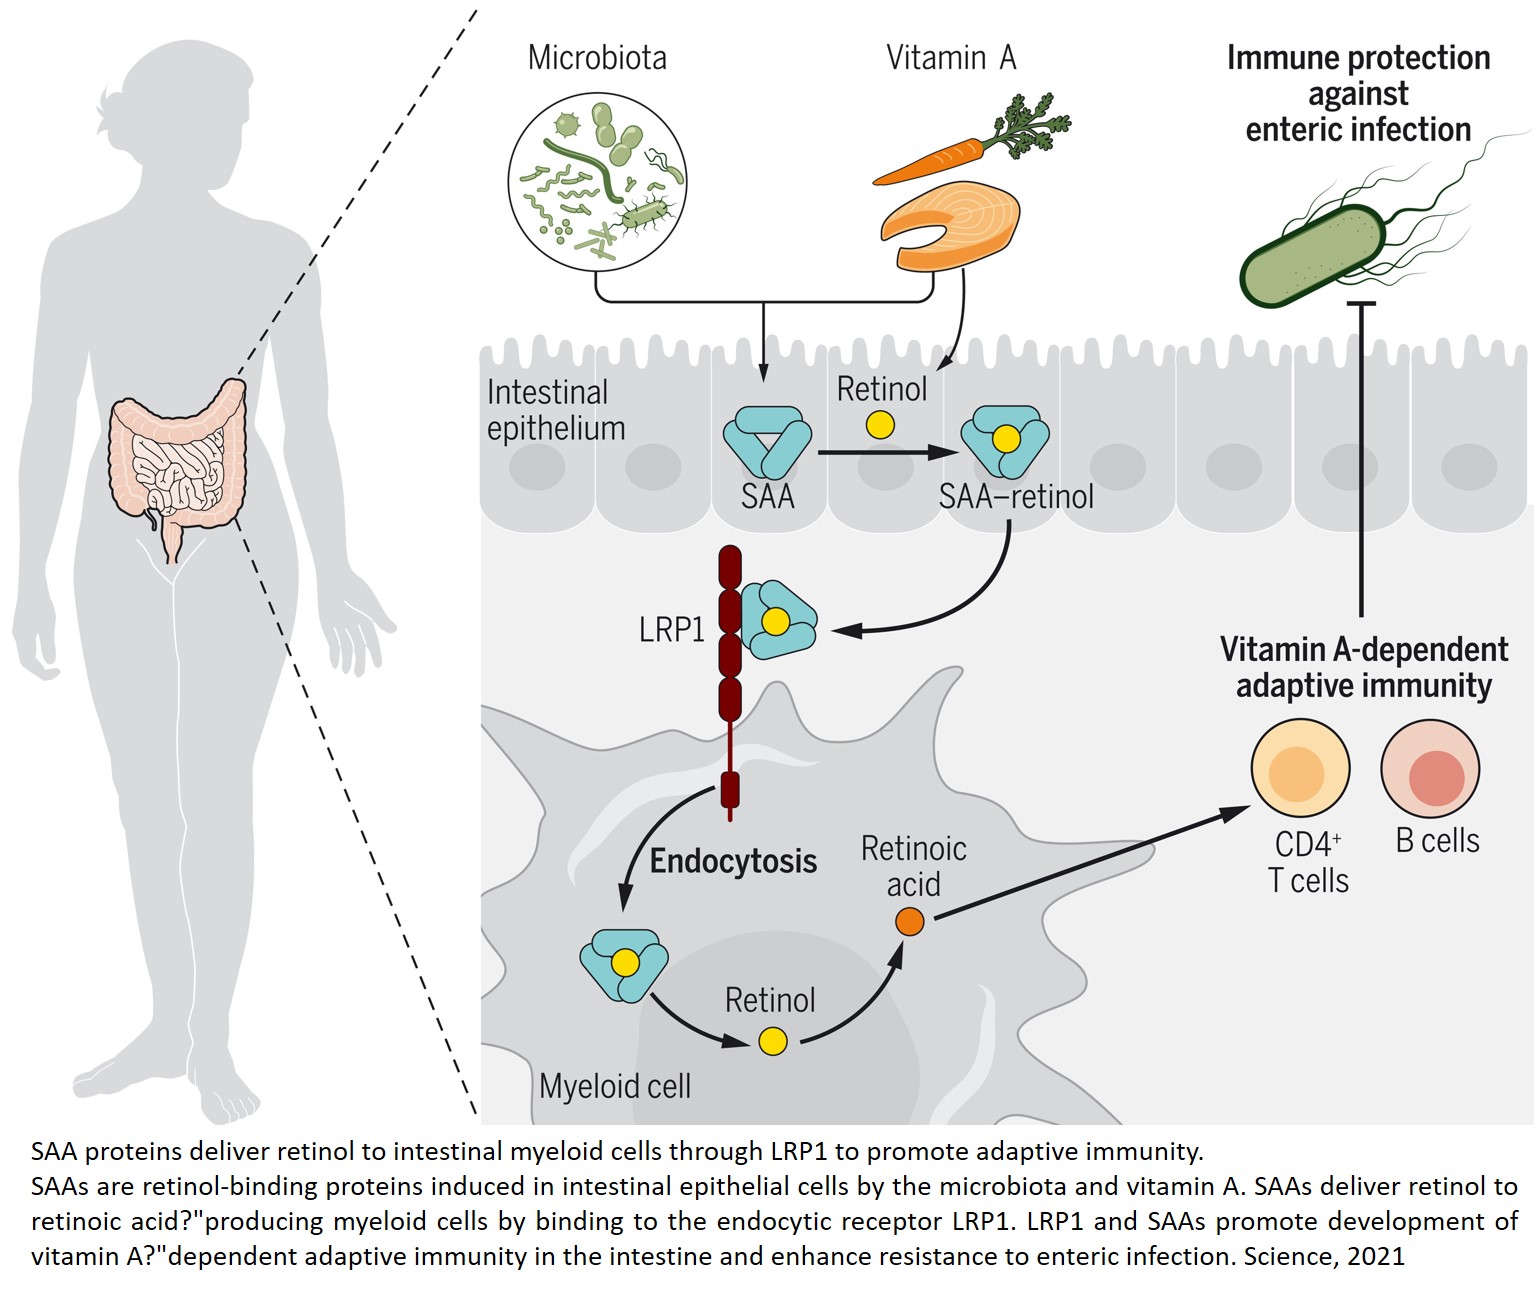 How vitamin A enters immune cells in the gut